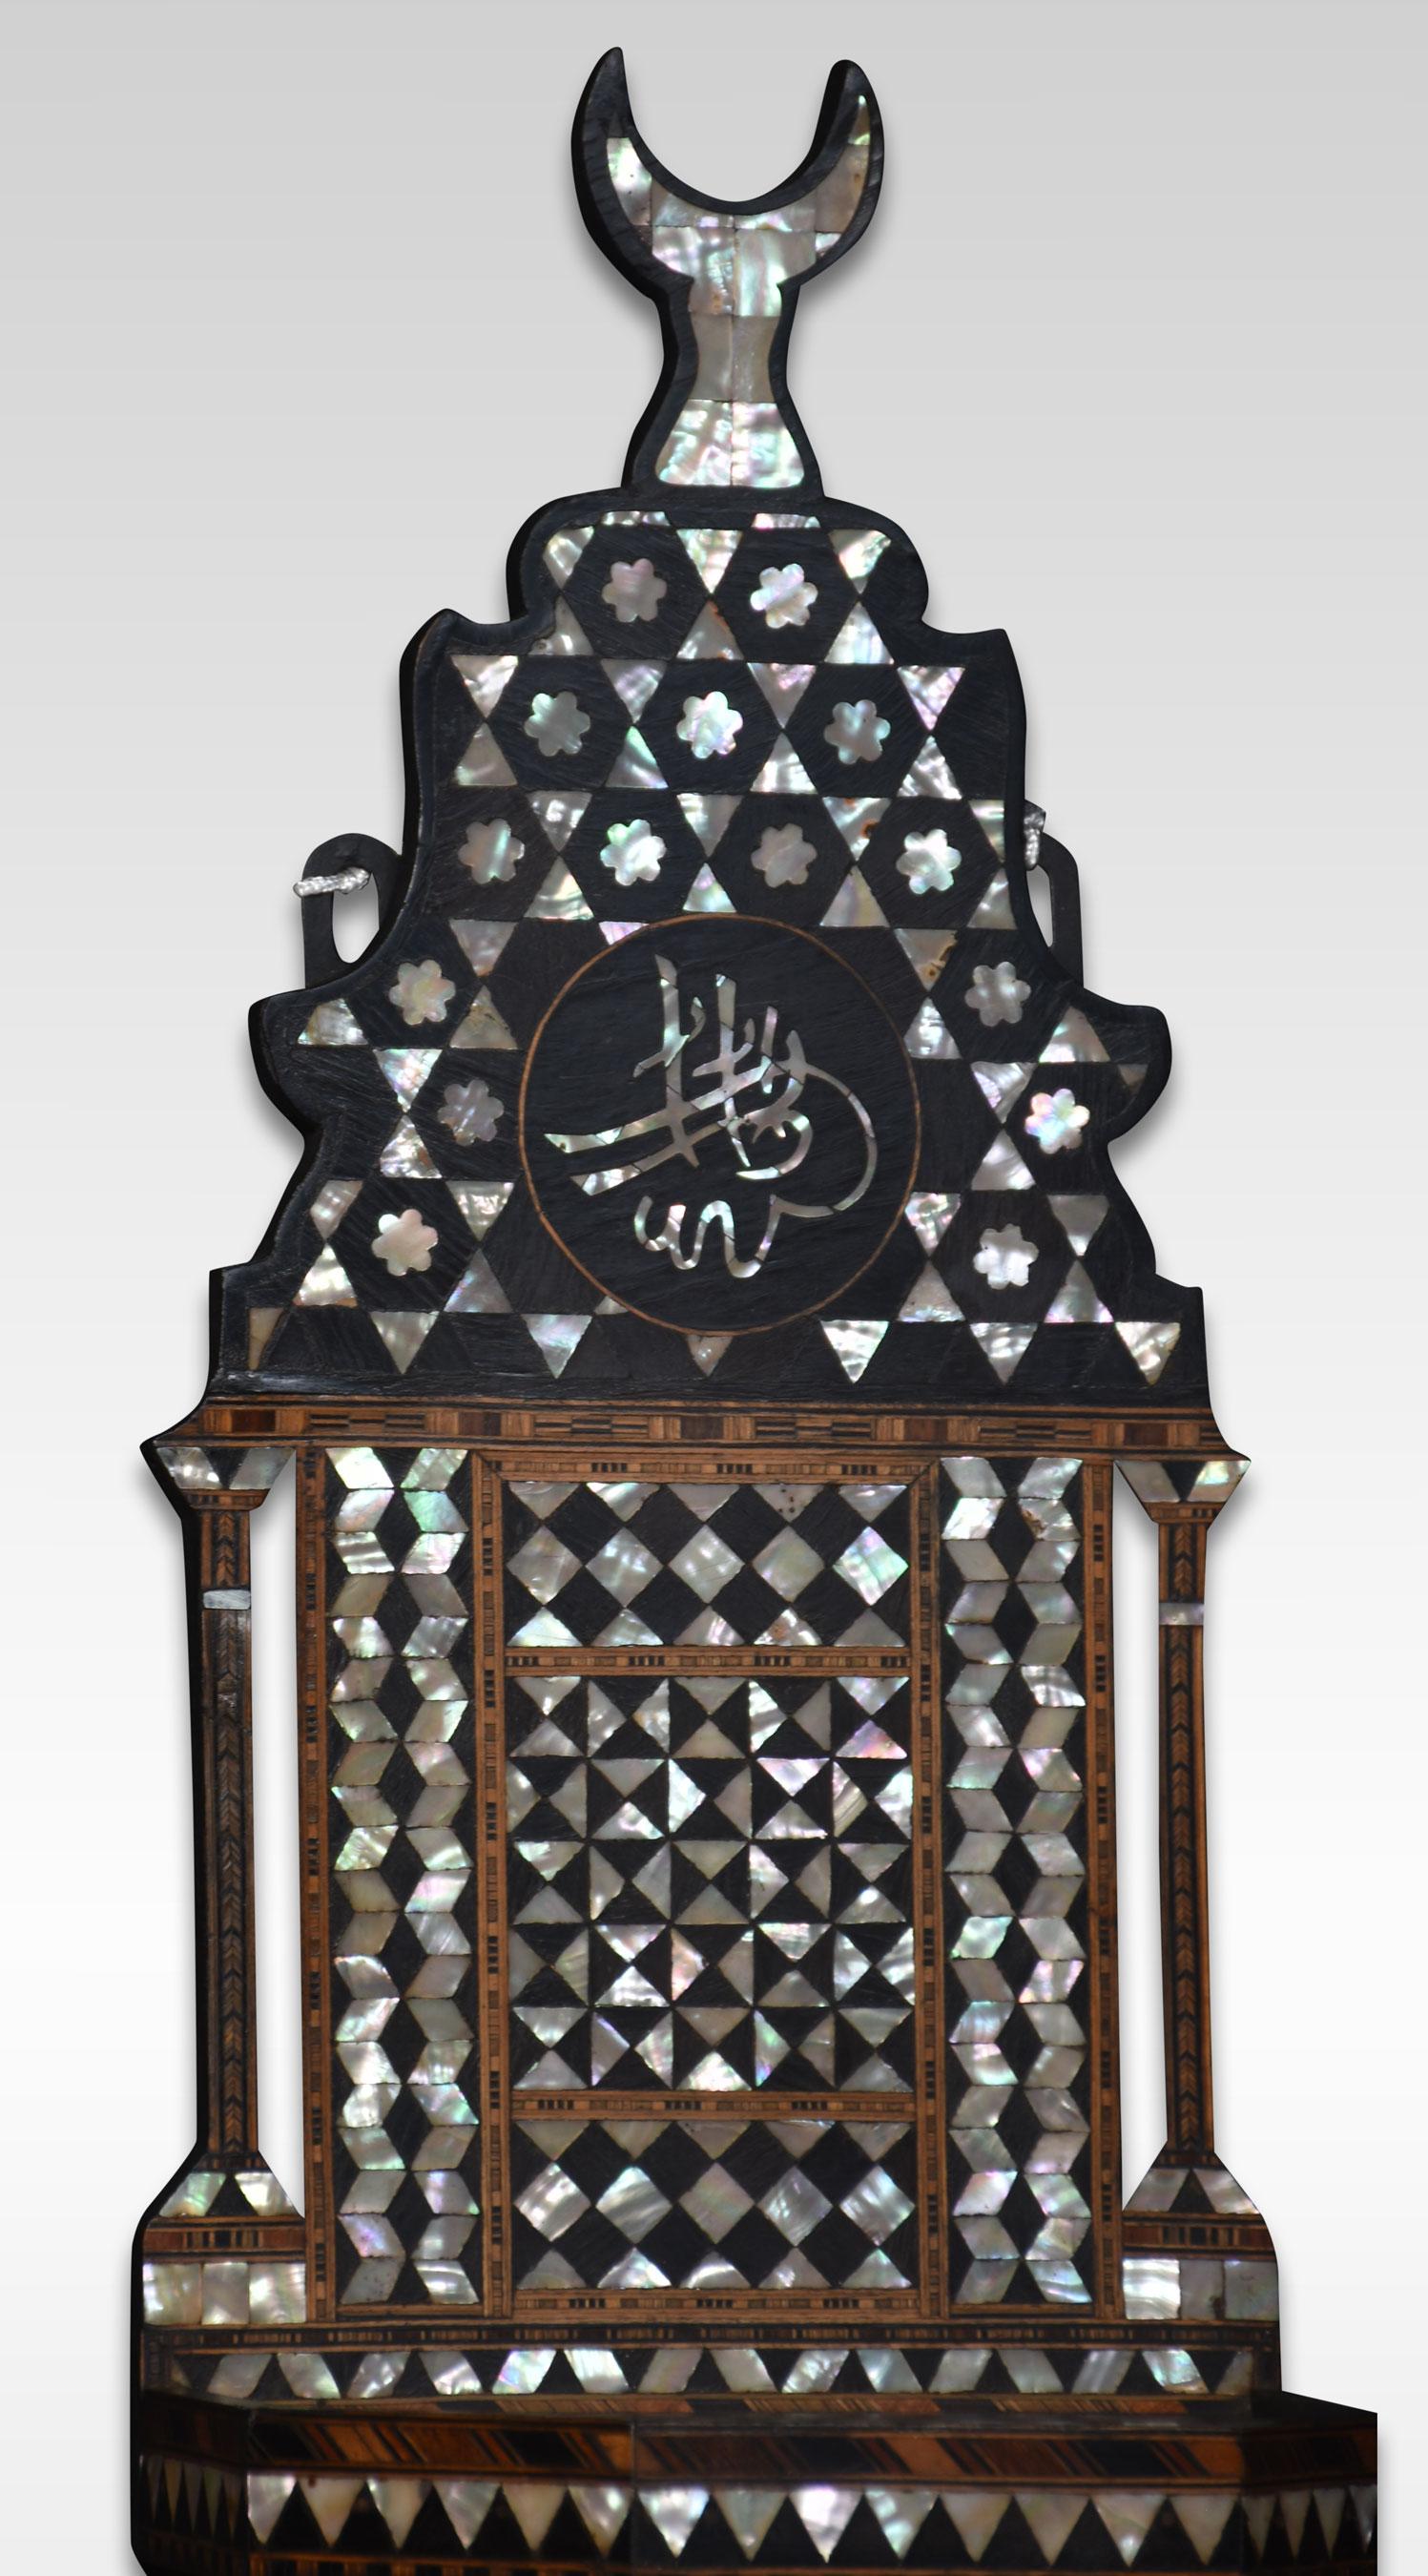 Moorish wall bracket expertly crafted with geometric inlays of mother of pearl, bone, and exotic hardwoods.
Dimensions
Height 24 Inches
Width 8.5 Inches
Depth 6 Inches